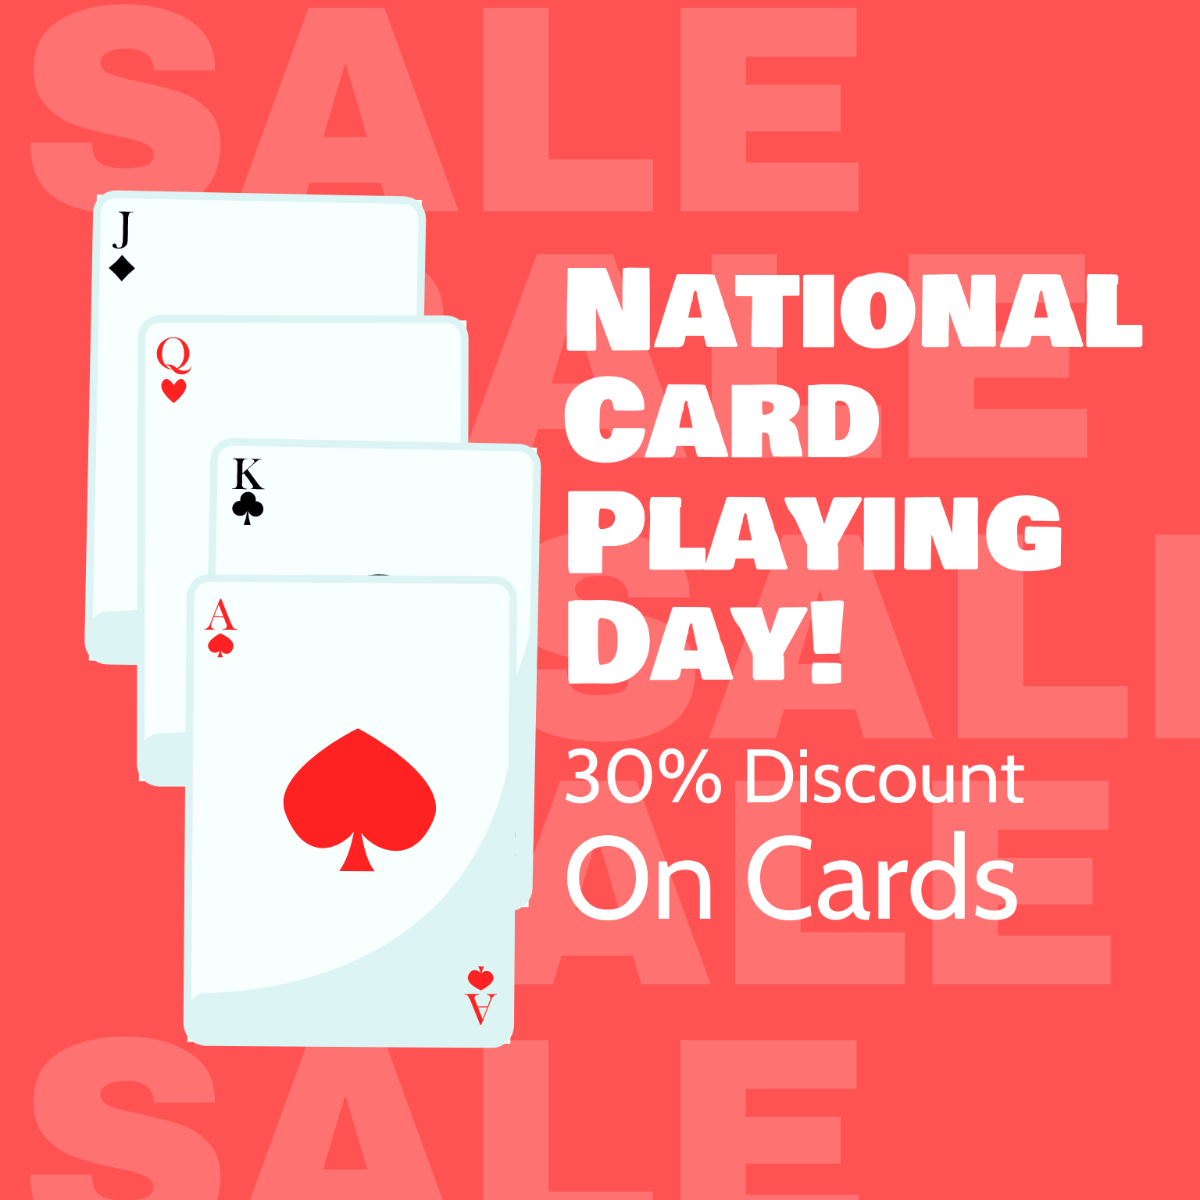 National Card Playing Day Flyer Vector Template